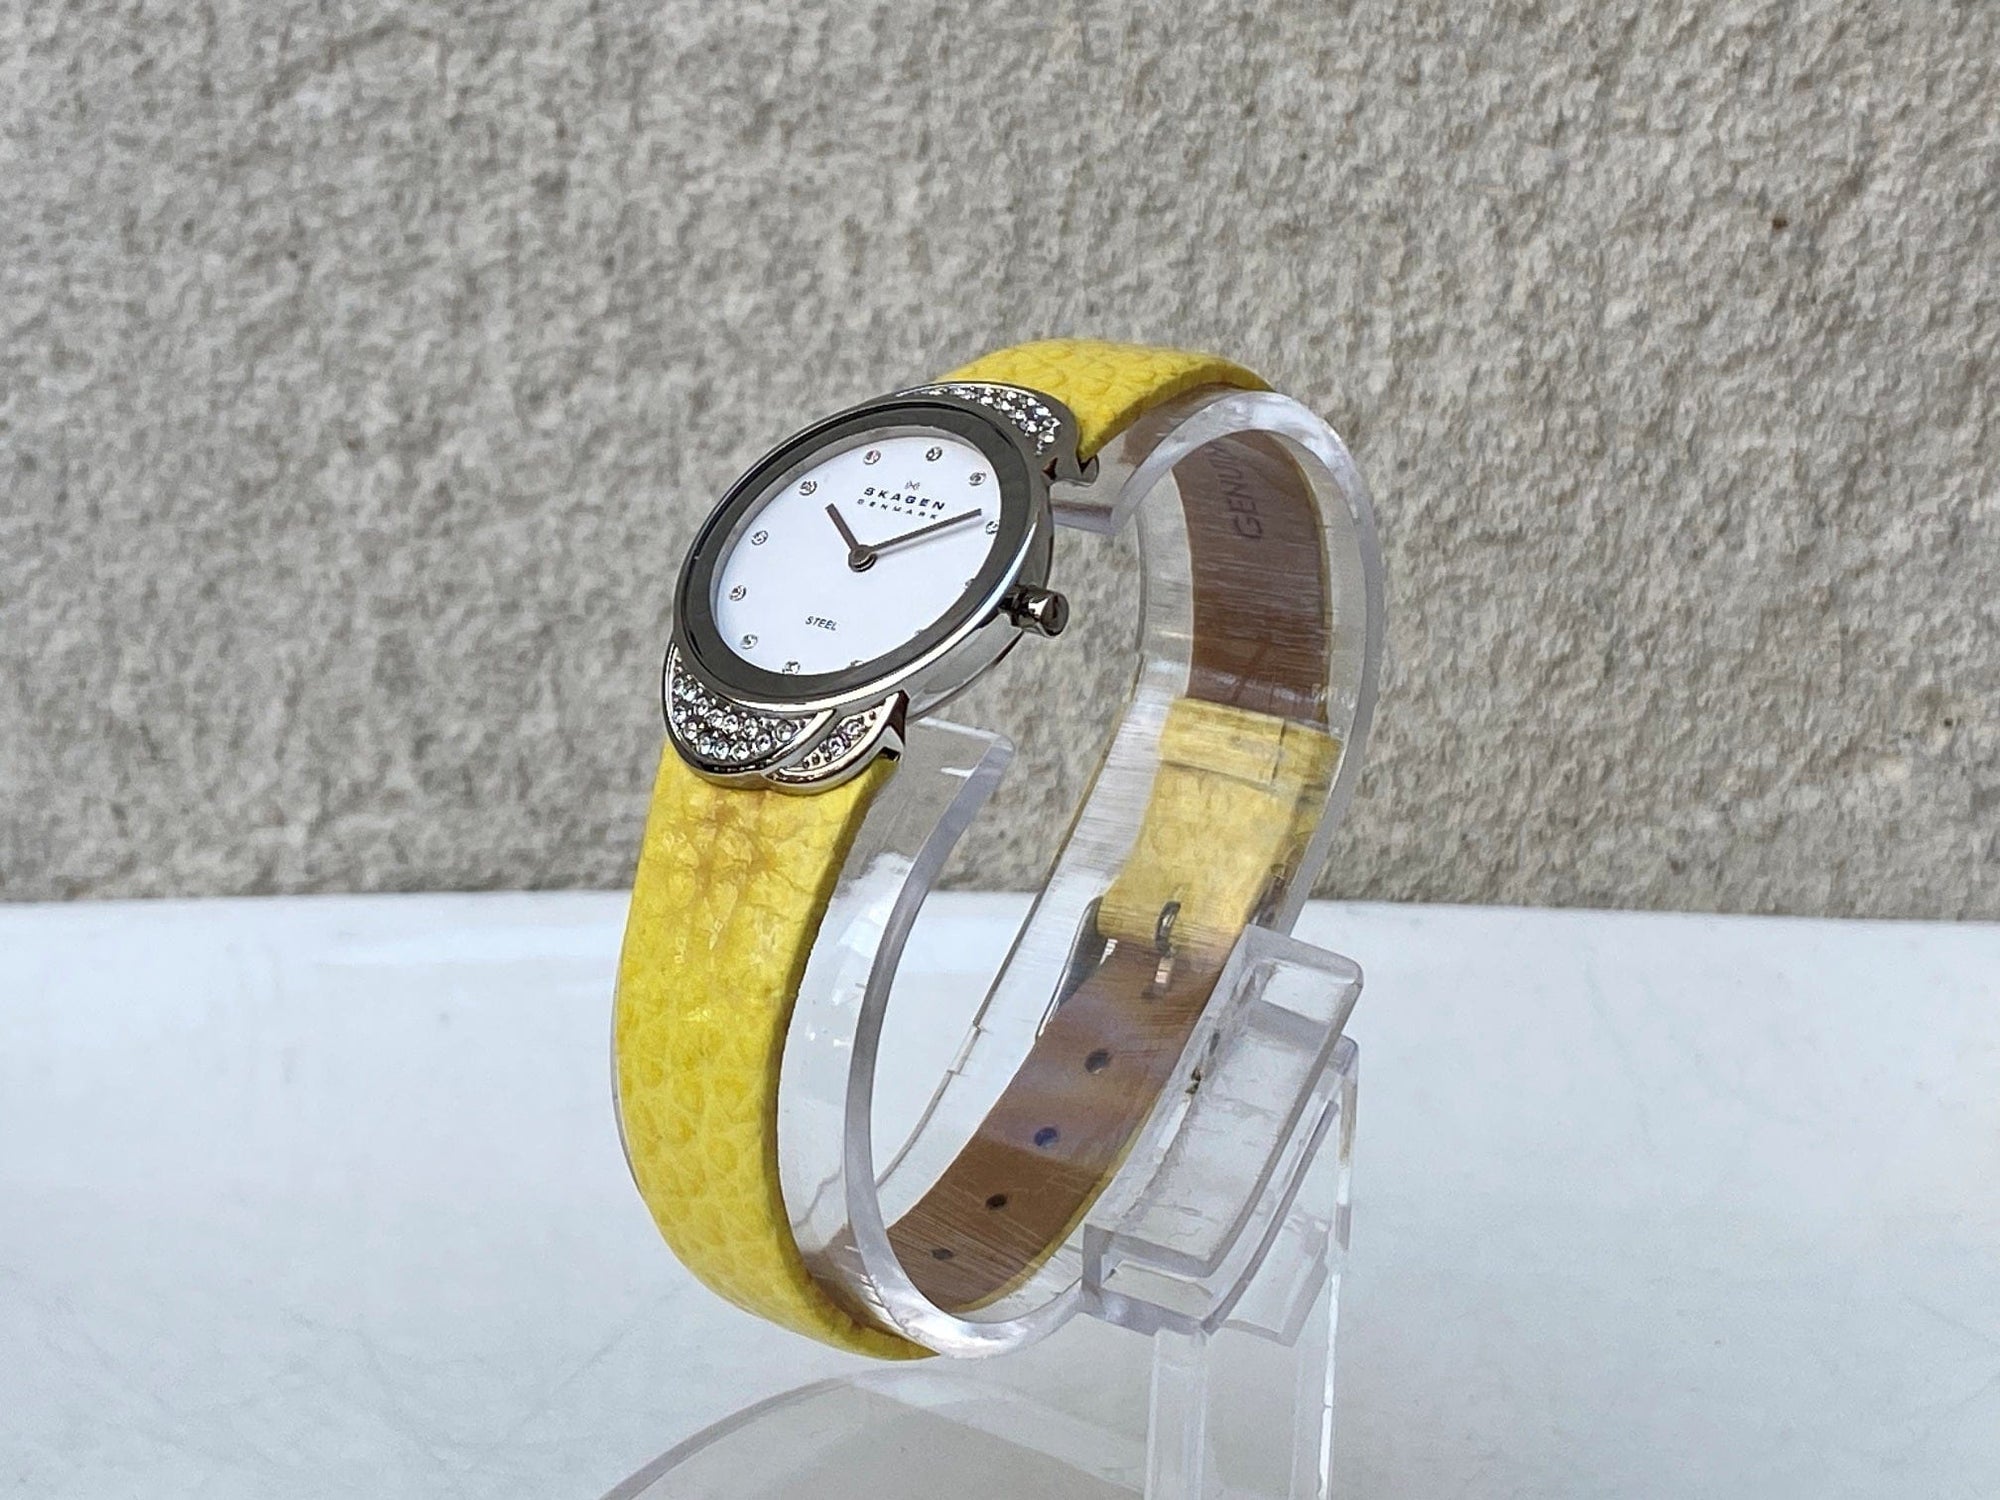 I Like Mike's Mid Century Modern Watch Skagen Women's Jeweled Silvertone Watch with Yellow Leather Band